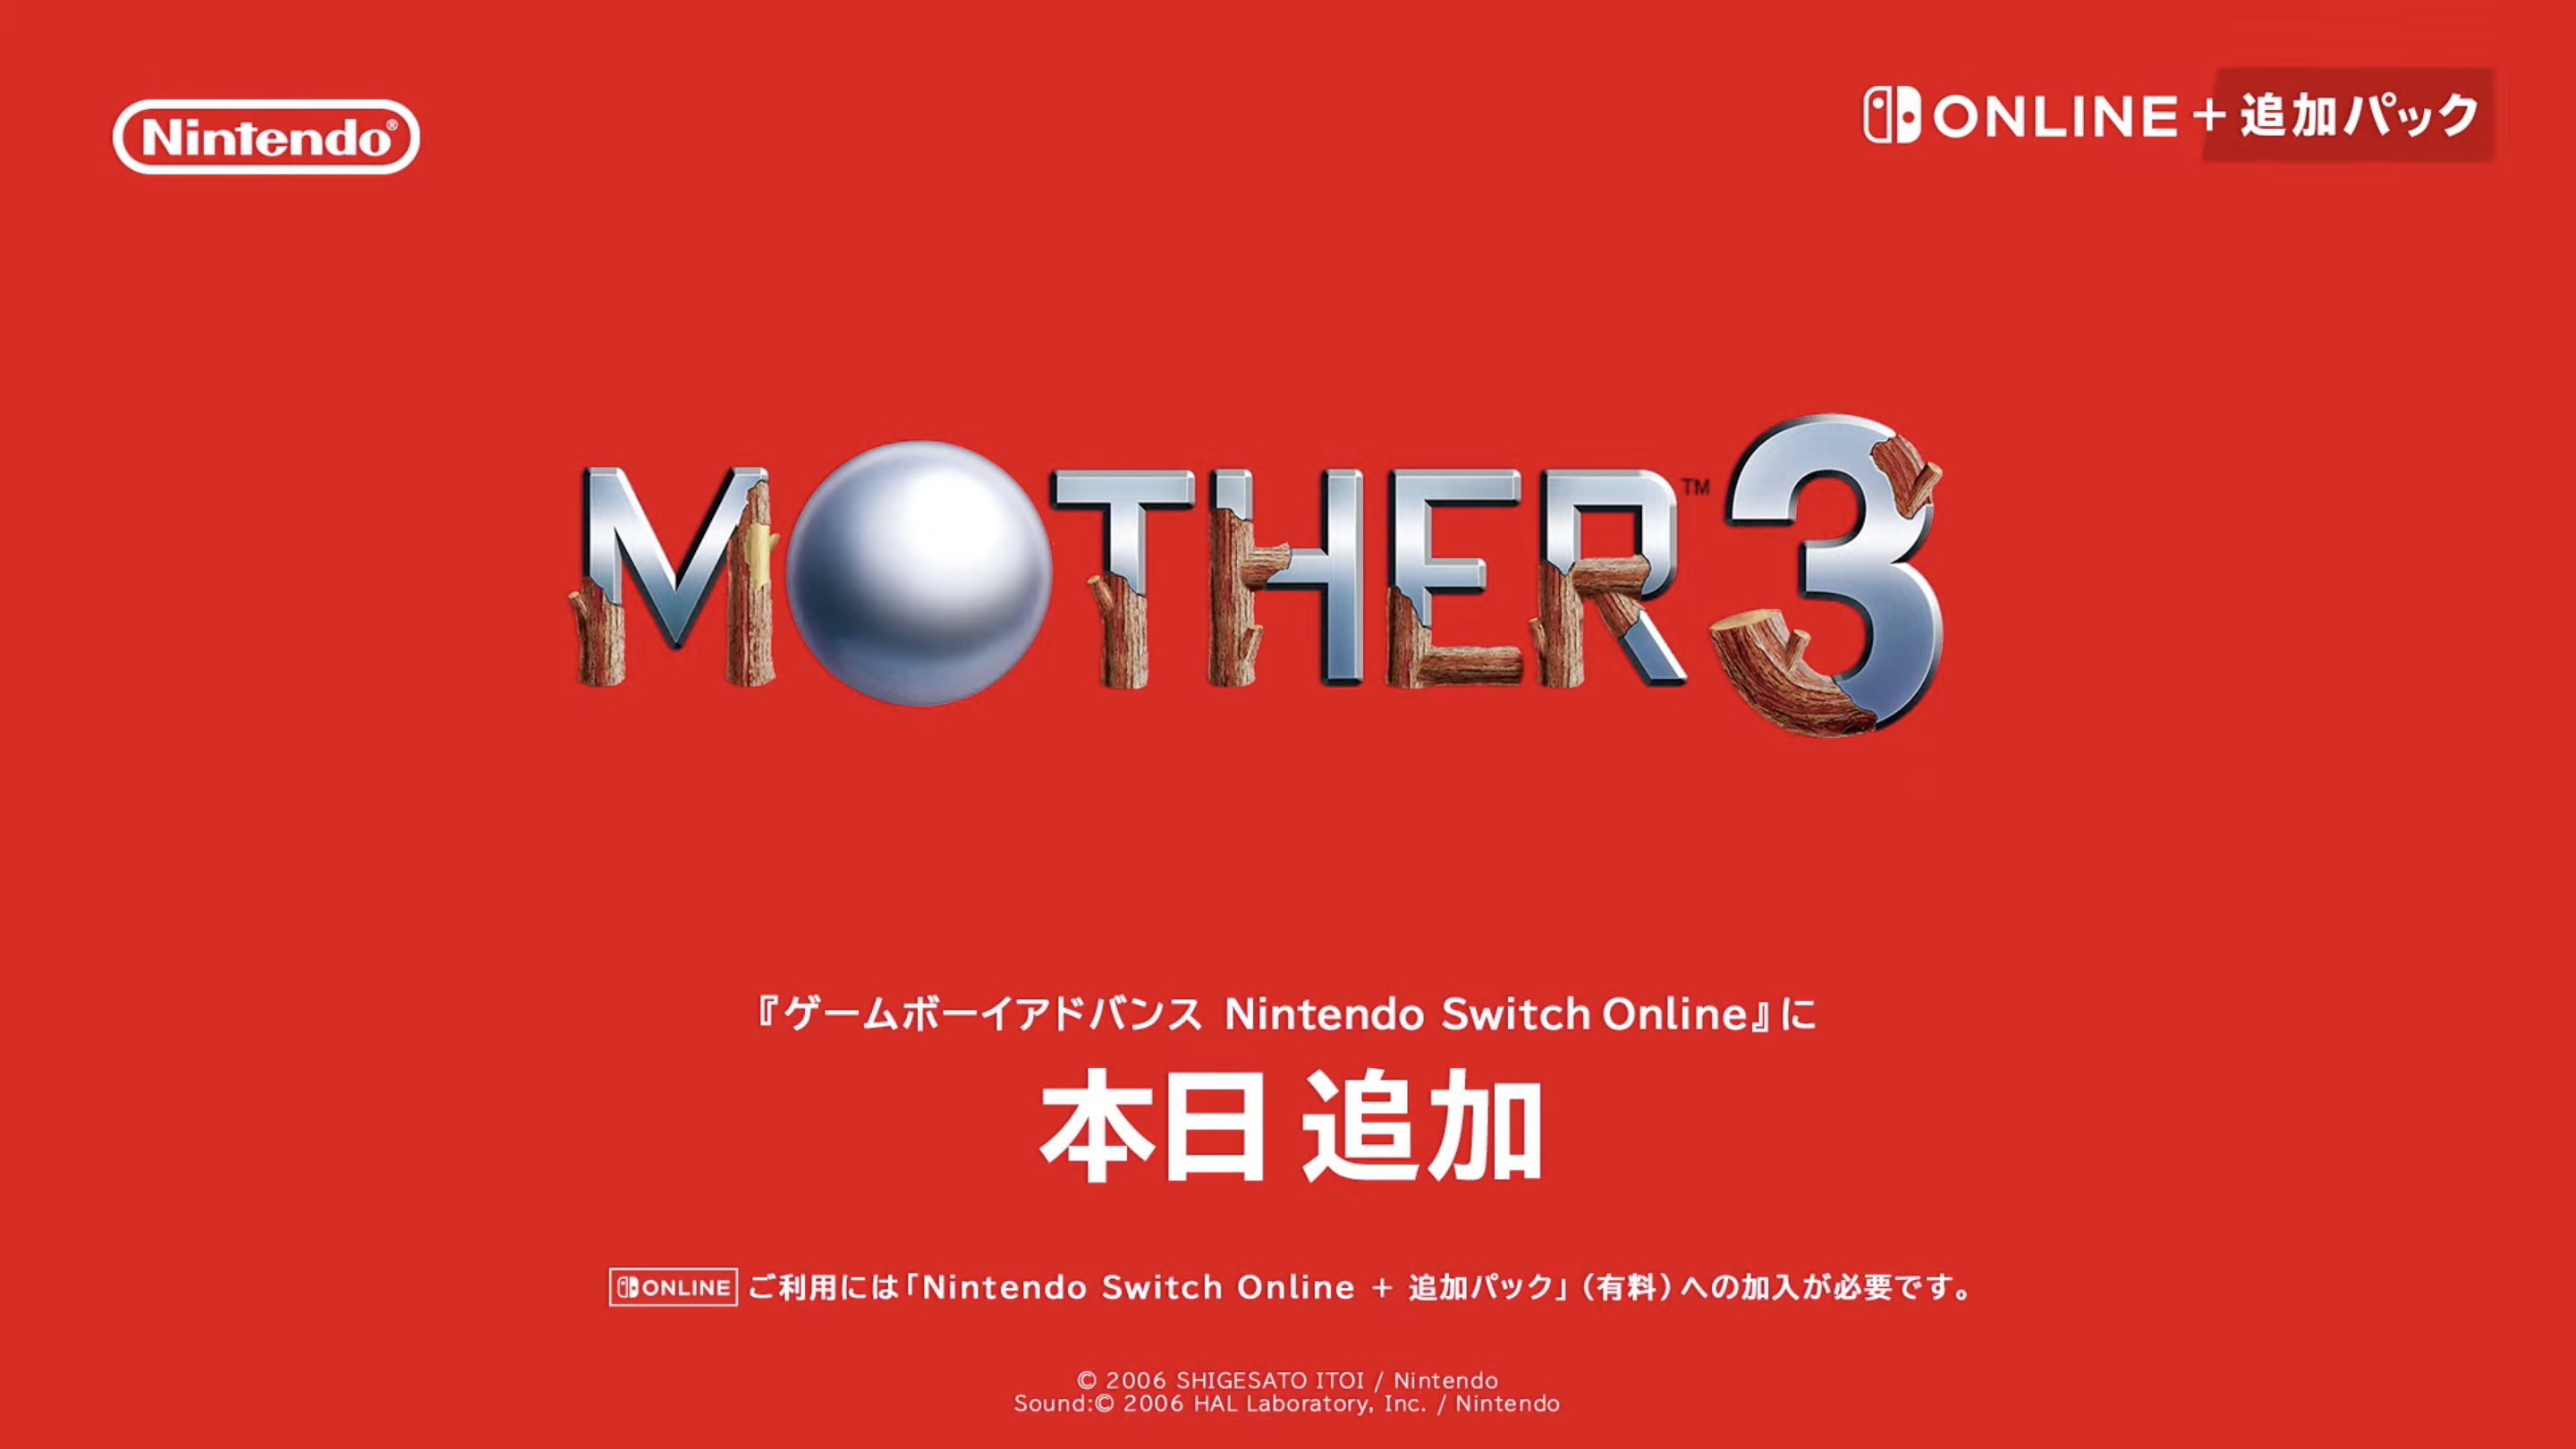 Mother 3 Out Now in Japan on Switch